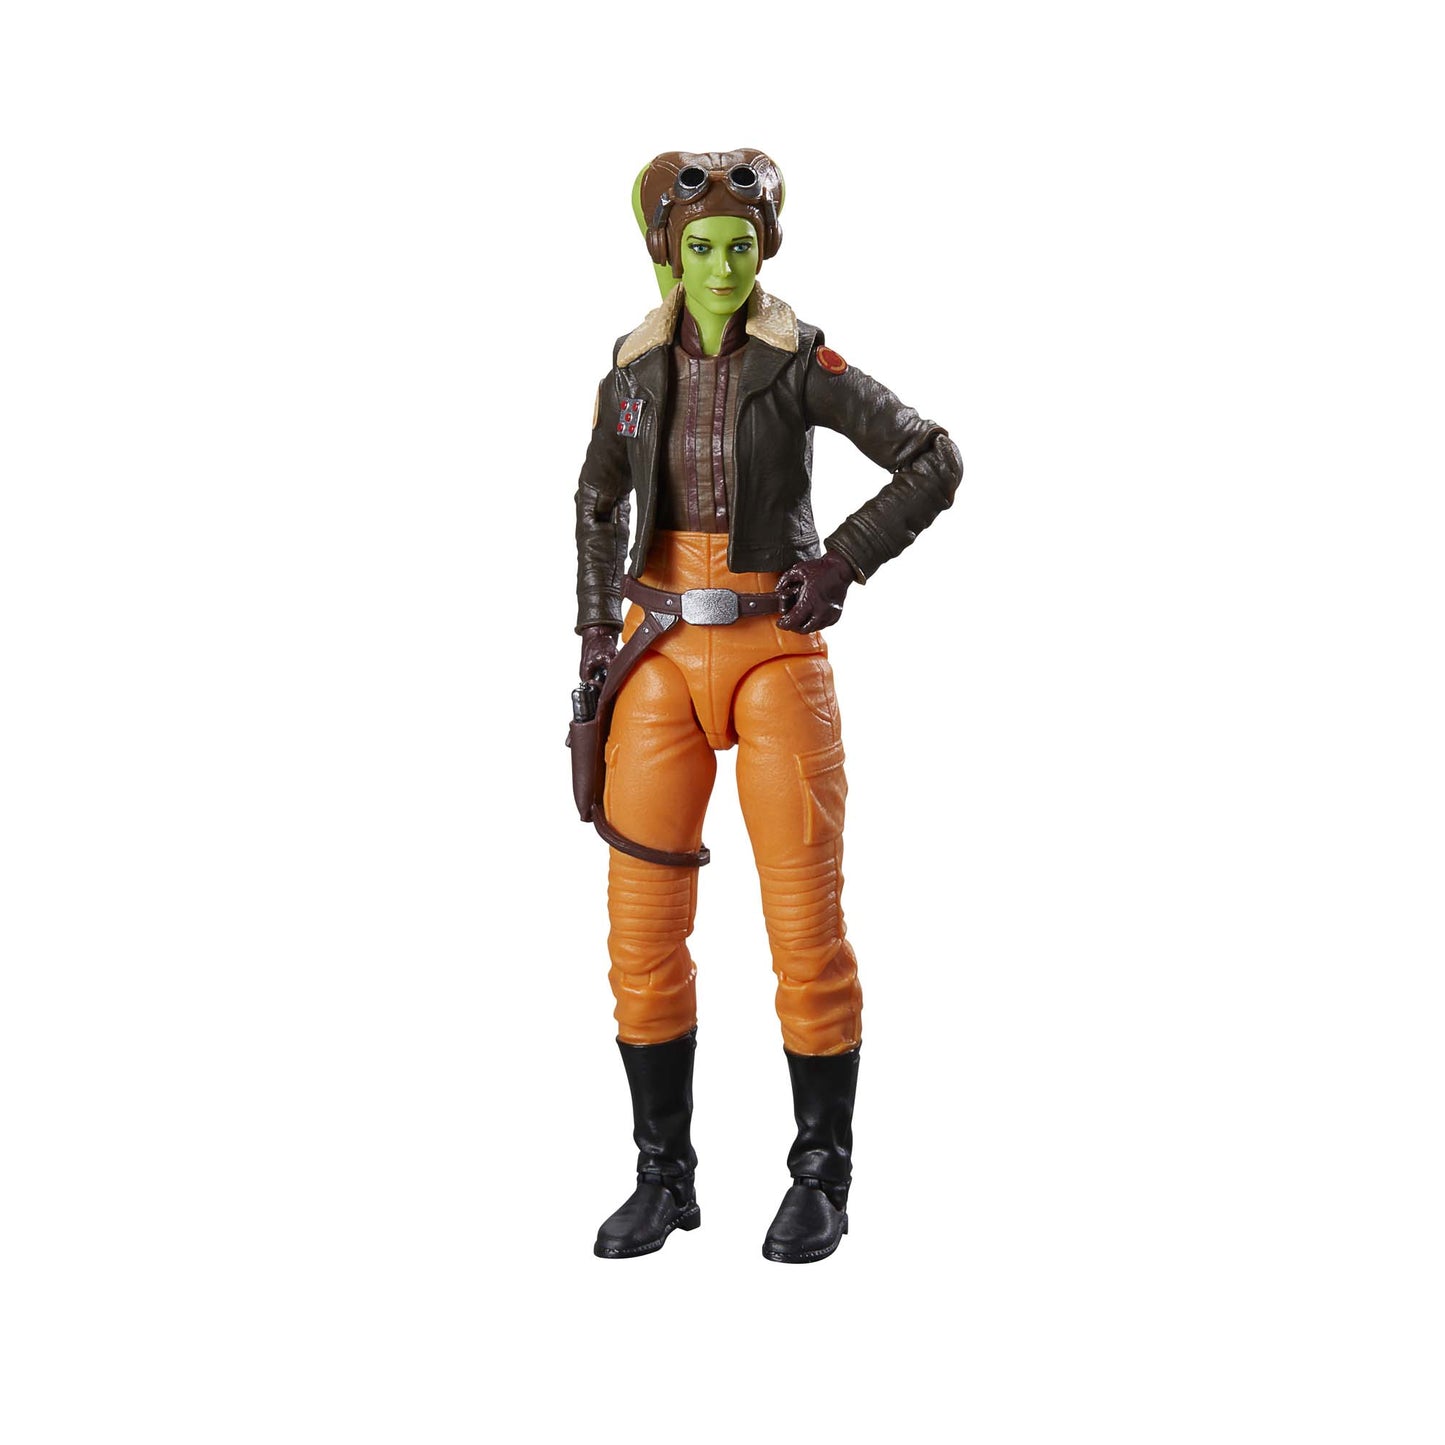 Star Wars The Black Series General Hera Syndulla Action Figure Toy 6-inch - heretoserveyou